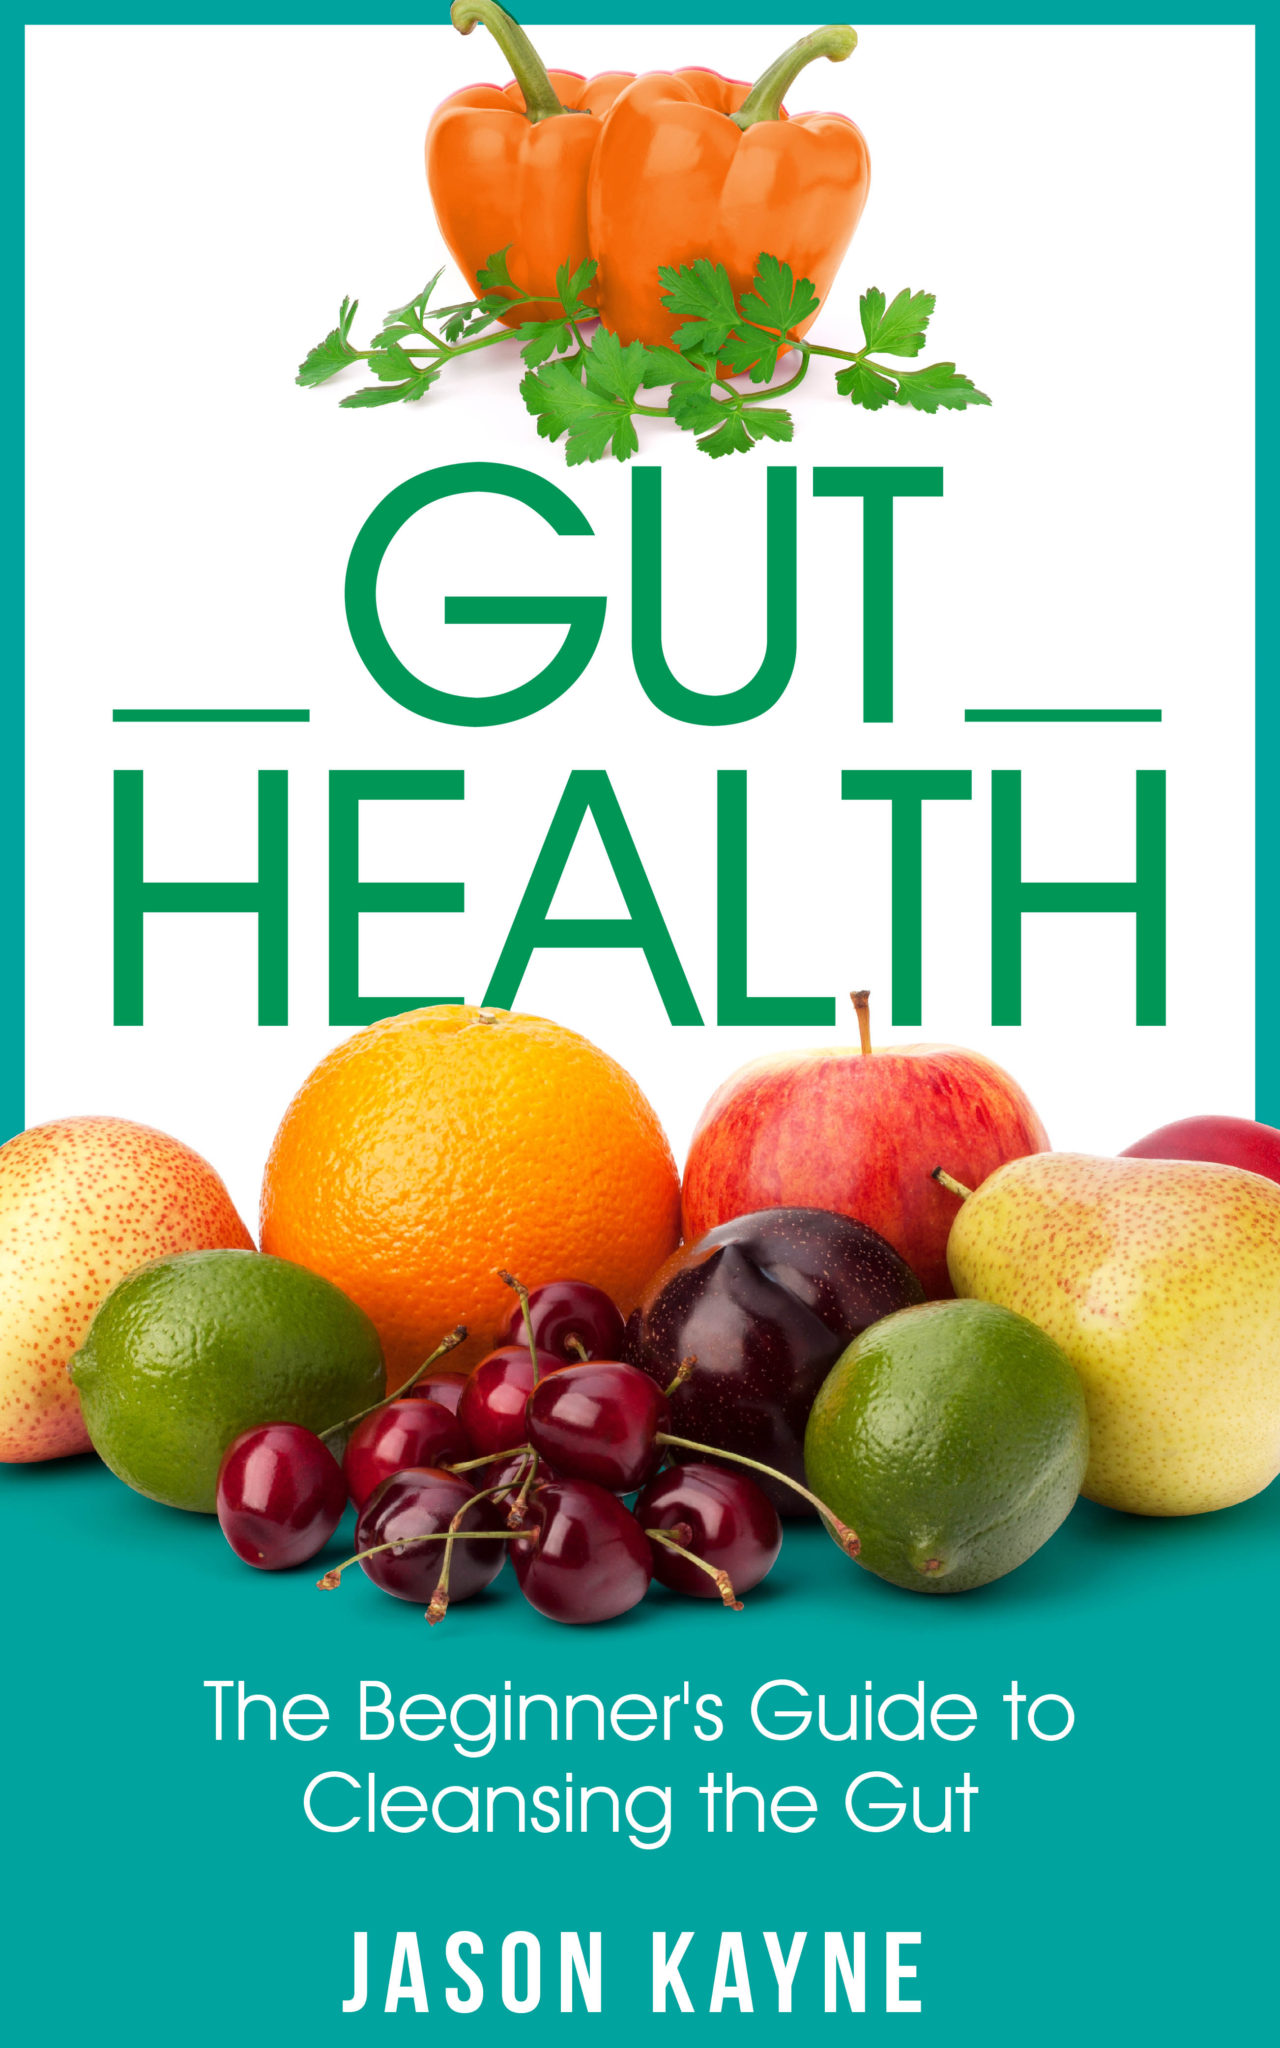 FREE: Gut Health: The Beginner’s Guide to Cleansing the Gut for Weight Loss, More Energy and Overall Health by Jason Kayne